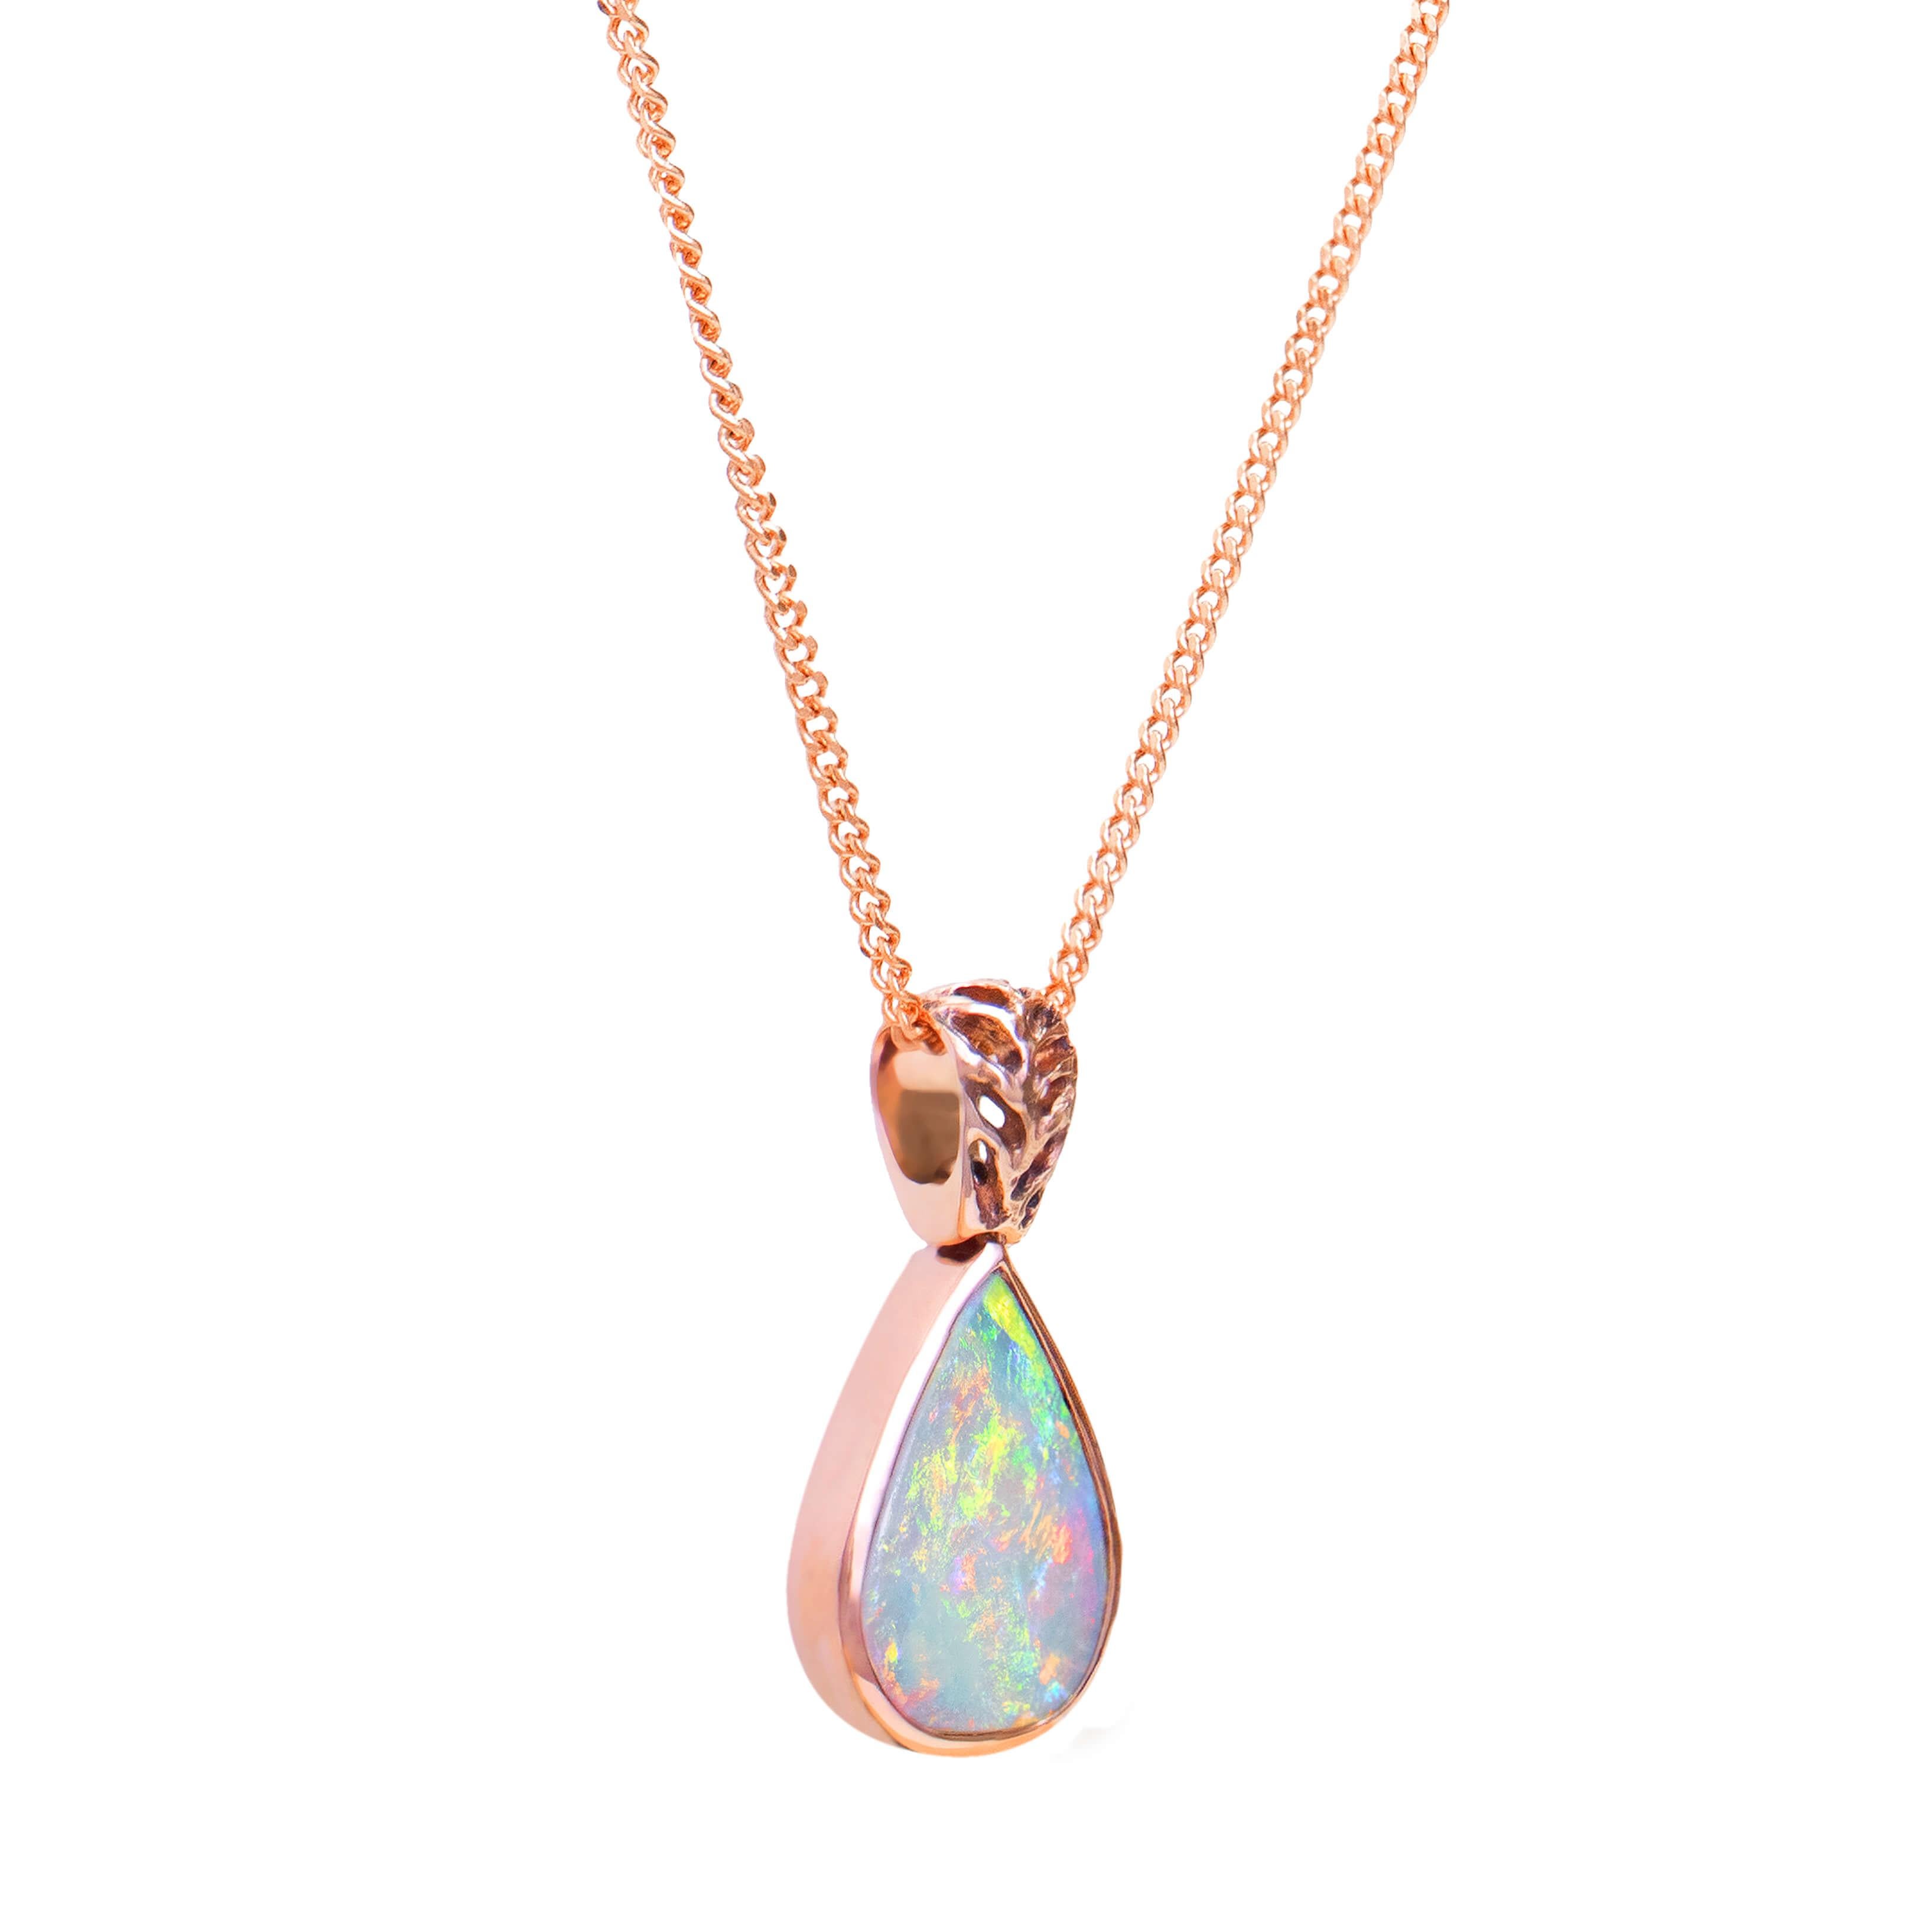 A very pretty necklace with an equally beautiful crystal opal. This necklace is solid 18k rose gold featuring a solid Australian Crystal Opal at it heart. The setting also includes a solid 18k rose gold chain. 

SPECIFICATIONS
Opal Type: Crystal